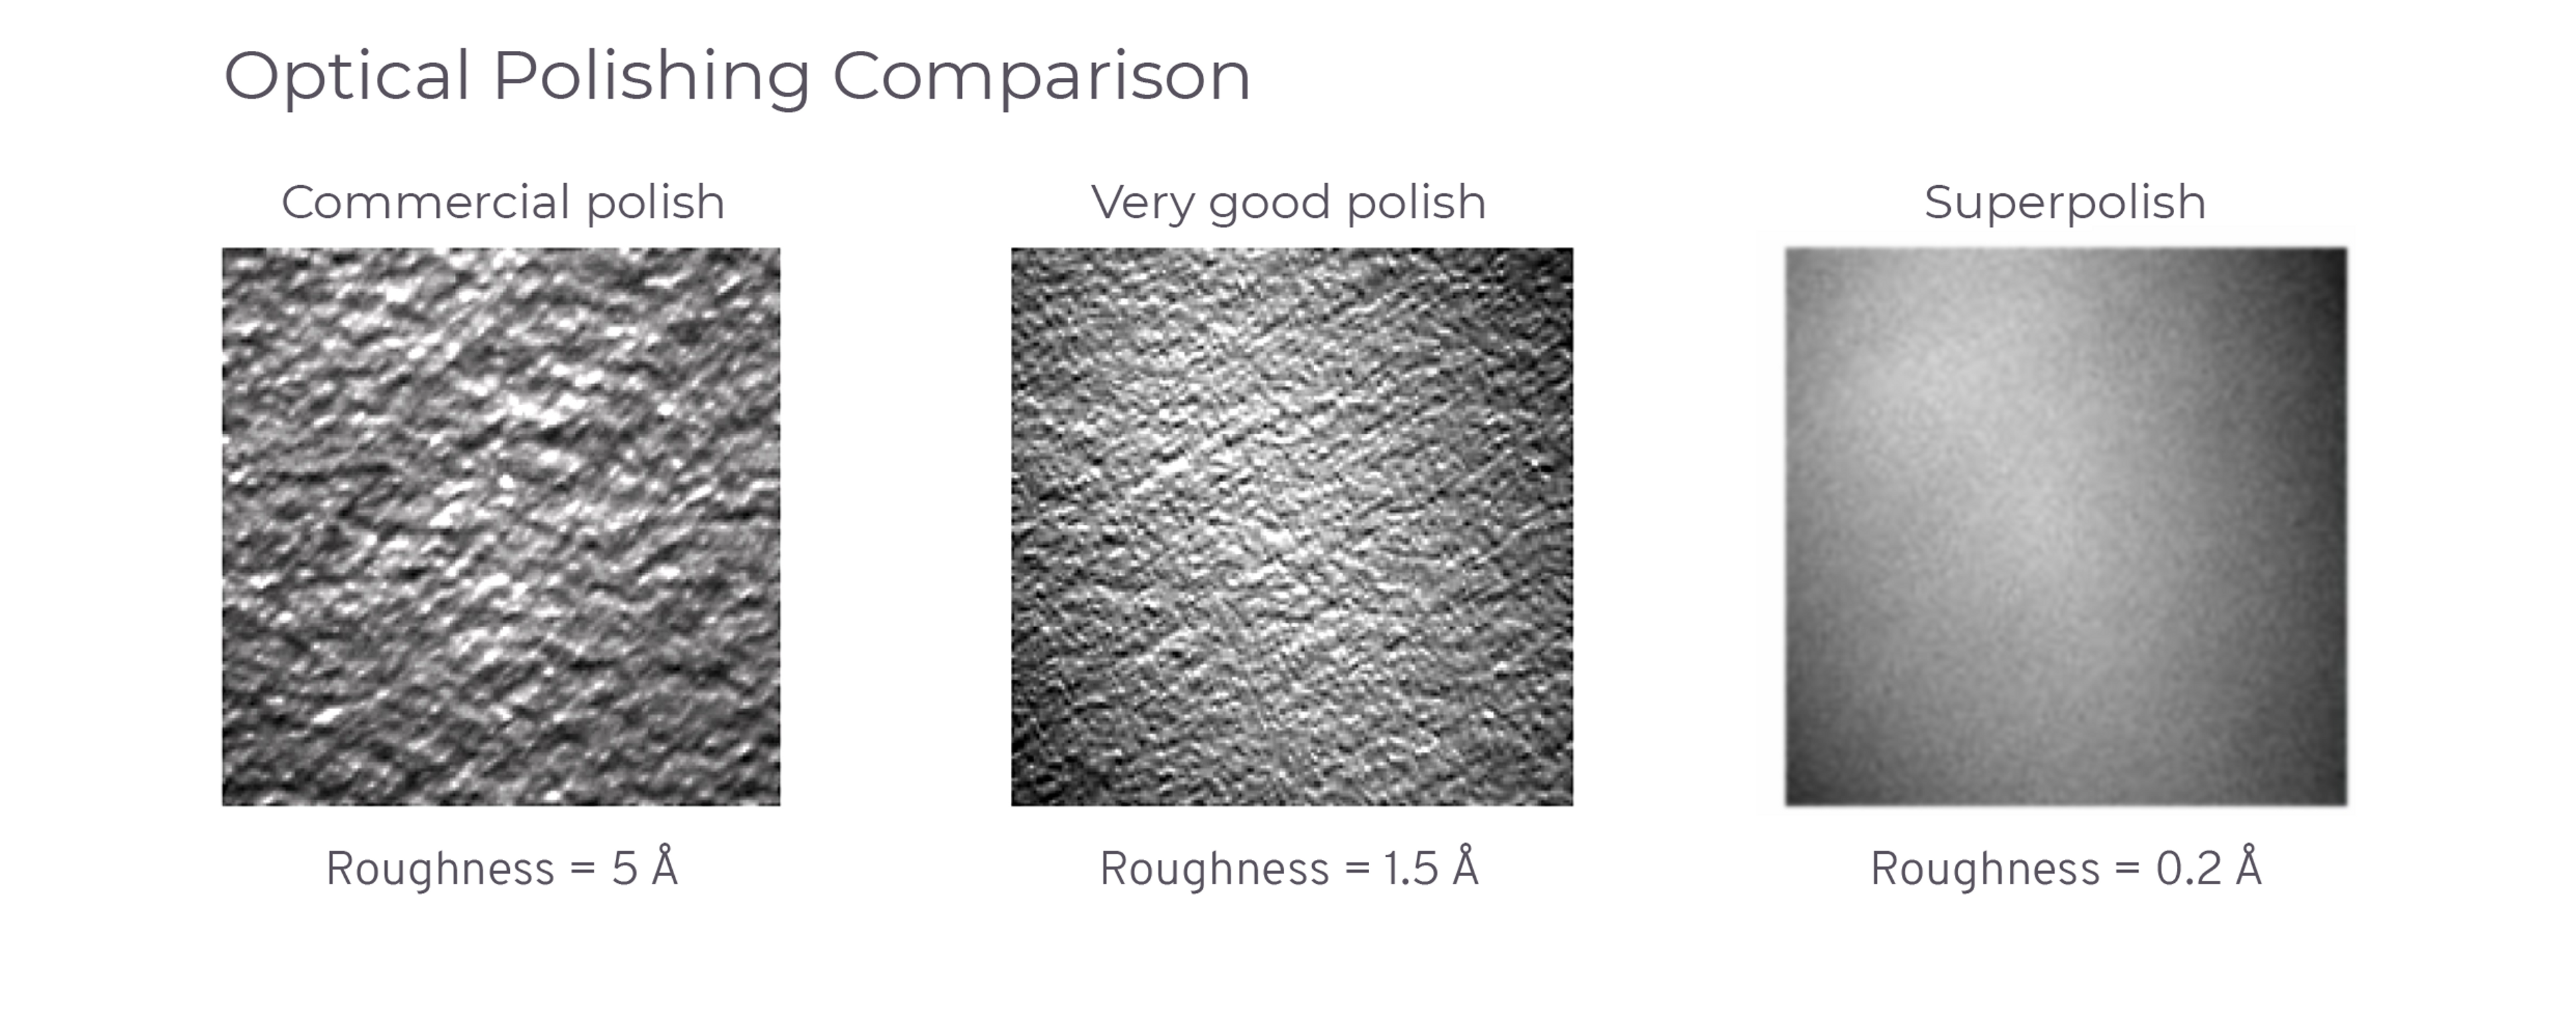 Comparison of the roughness of superpolished optics